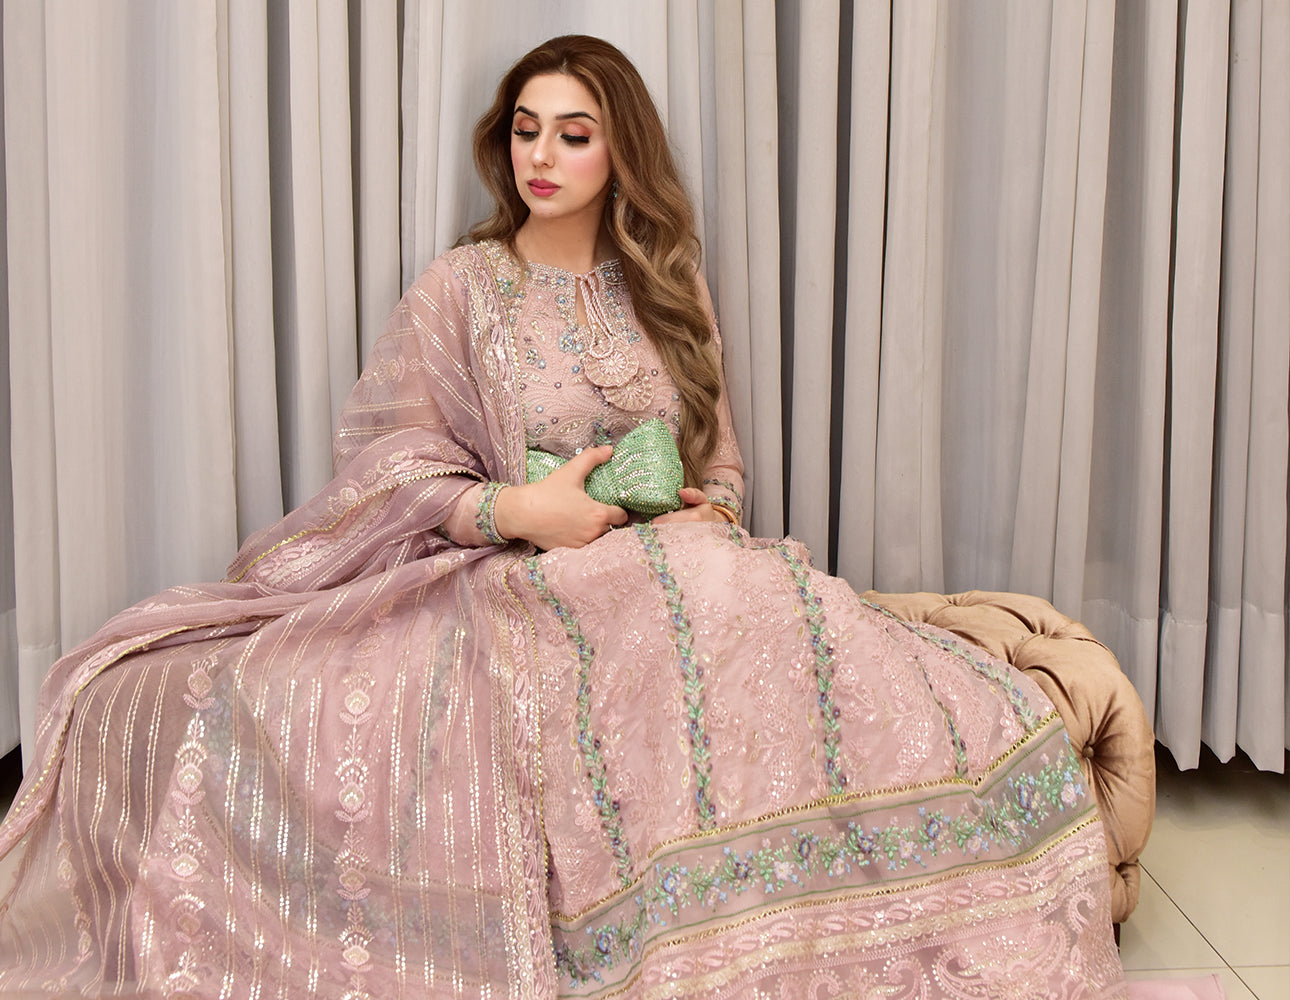 Pakistani Bridal Dress in Pink Gown and Dupatta Style